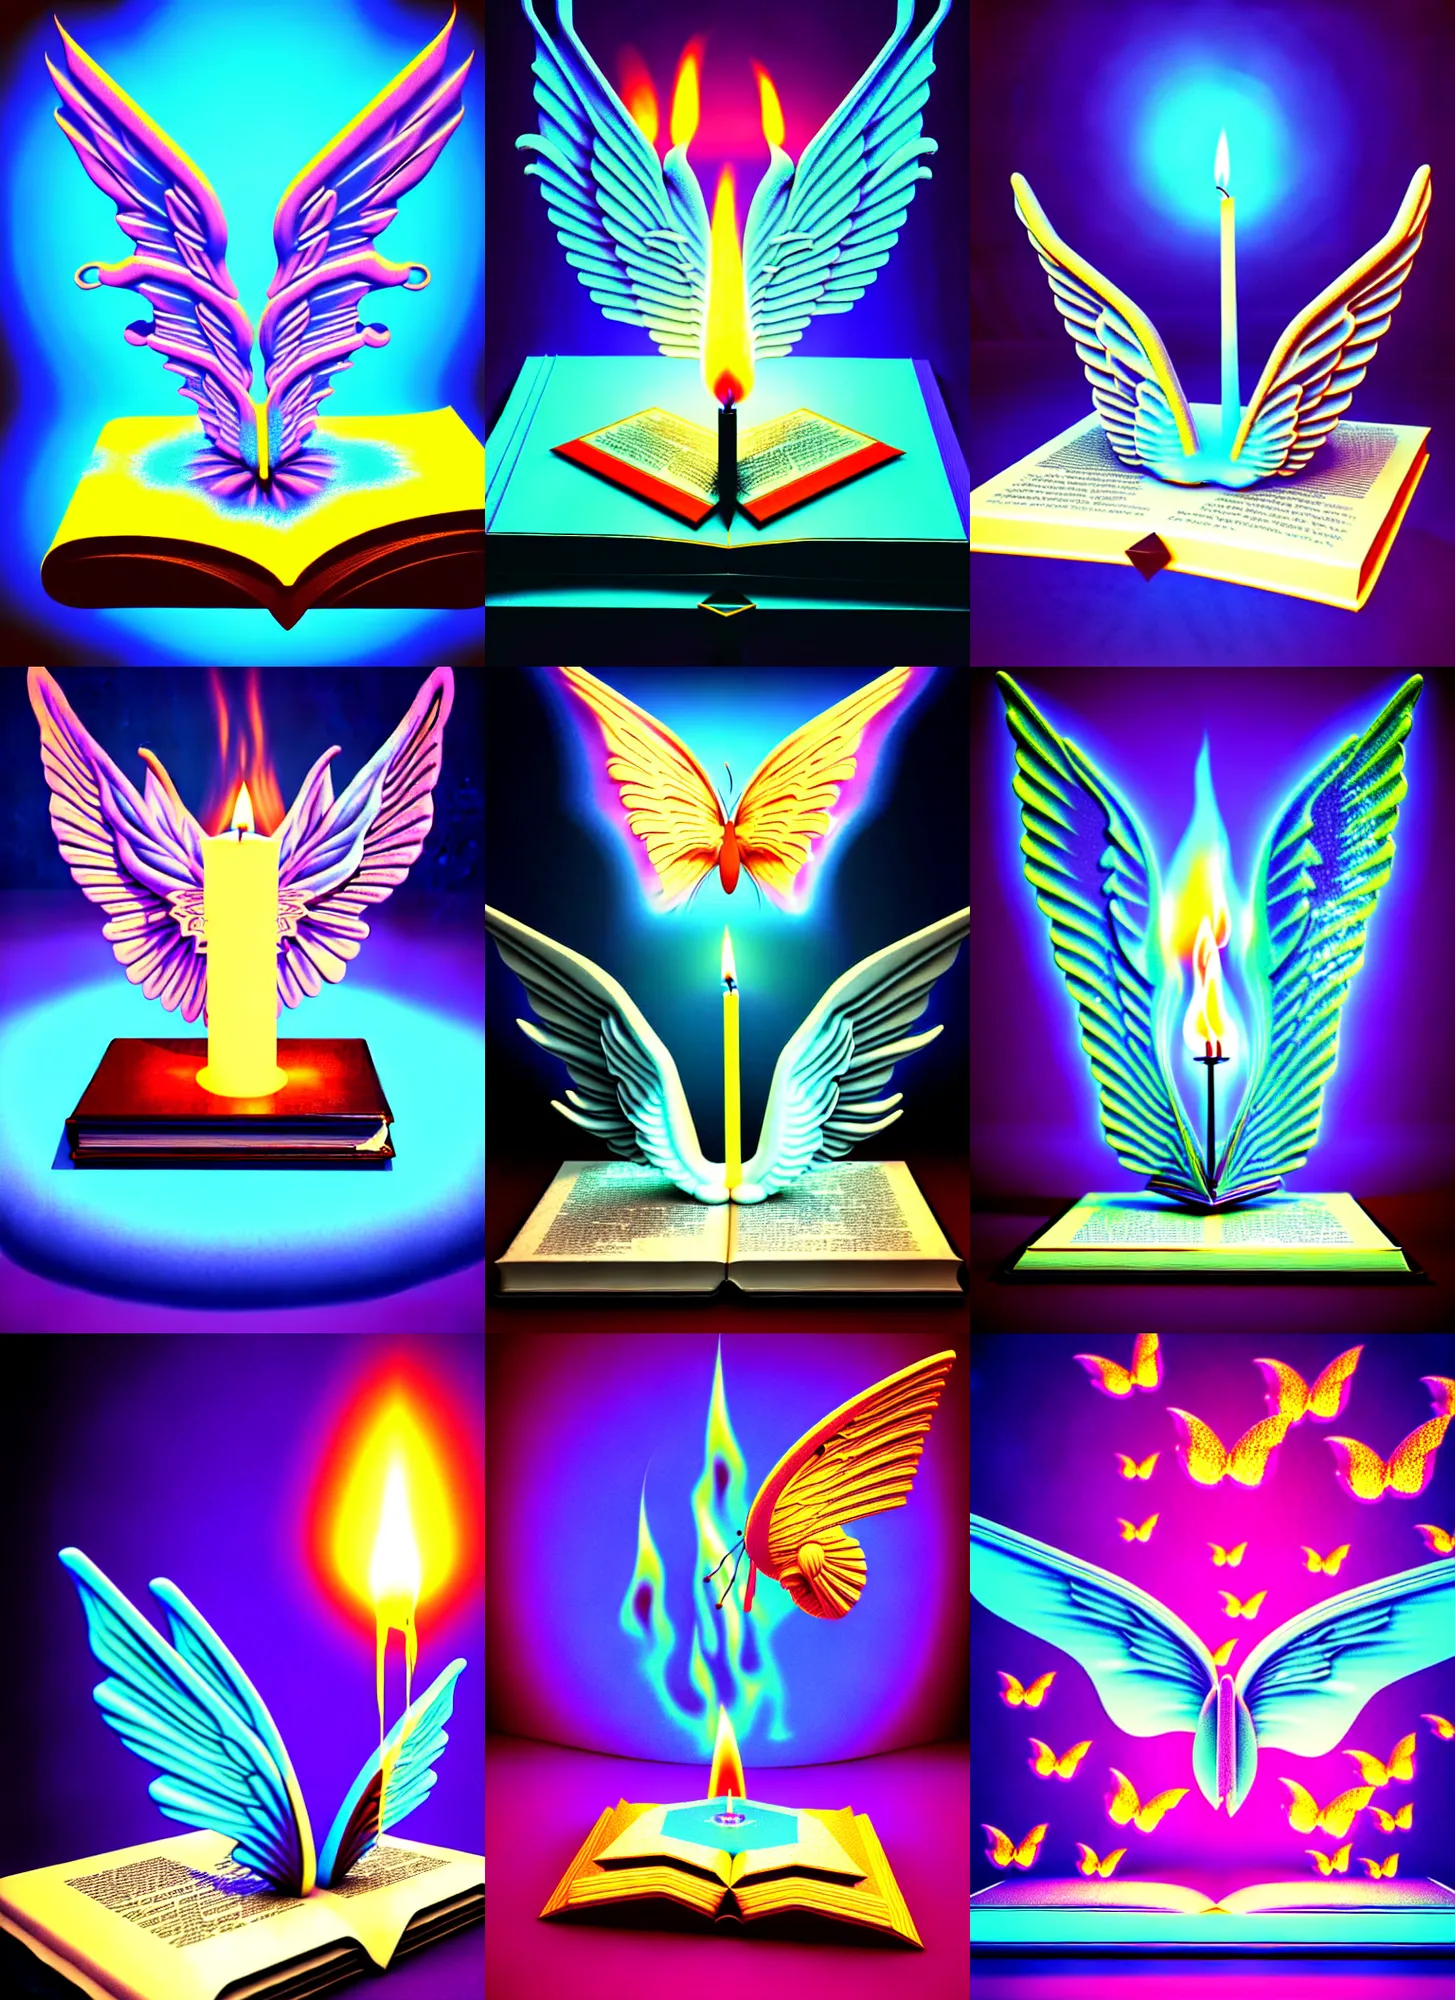 Prompt: 3 d render of melting candle on a book melting with angel wings against a psychedelic surreal background with 3 d butterflies and 3 d flowers n the style of 1 9 9 0's cg graphics 3 d rendered y 2 k aesthetic by ichiro tanida, 3 do magazine, wide shot